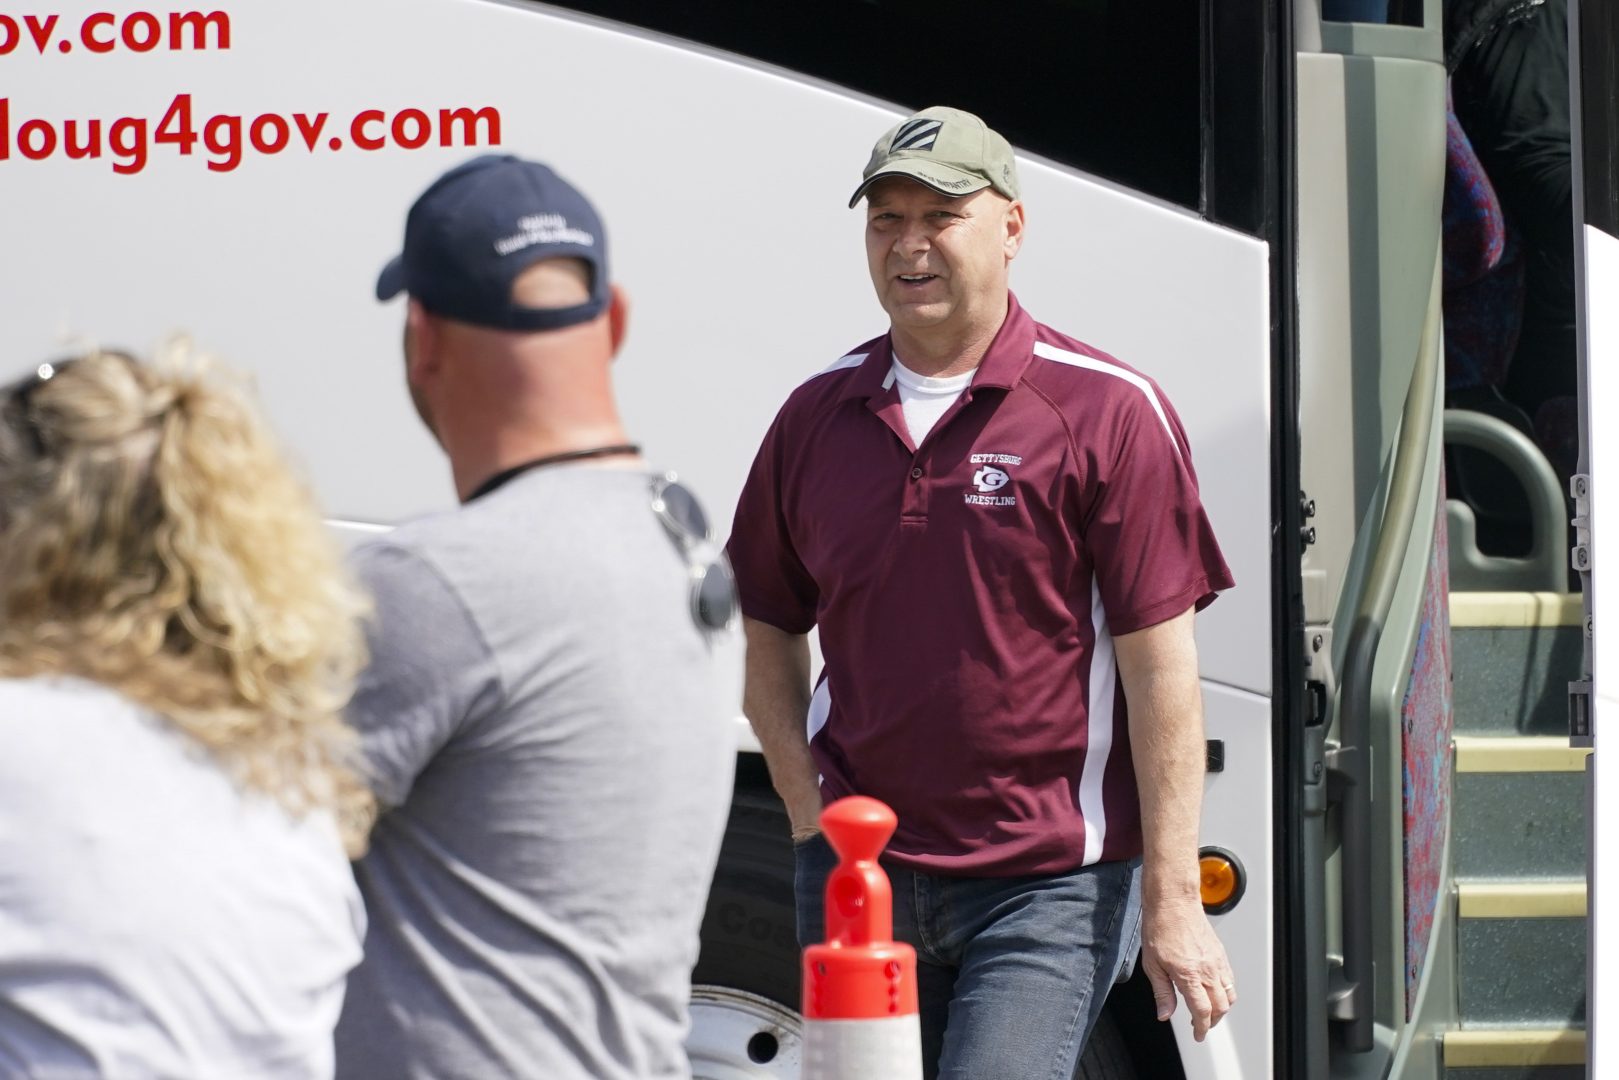 Pennsylvania state Sen. Doug Mastriano, R-Franklin, right,,a Republican running for Governor of Pennsylvania, arrives at a campaign stop Tuesday, May 10, 2022, in Portersville, Pa. (AP Photo/Keith Srakocic)